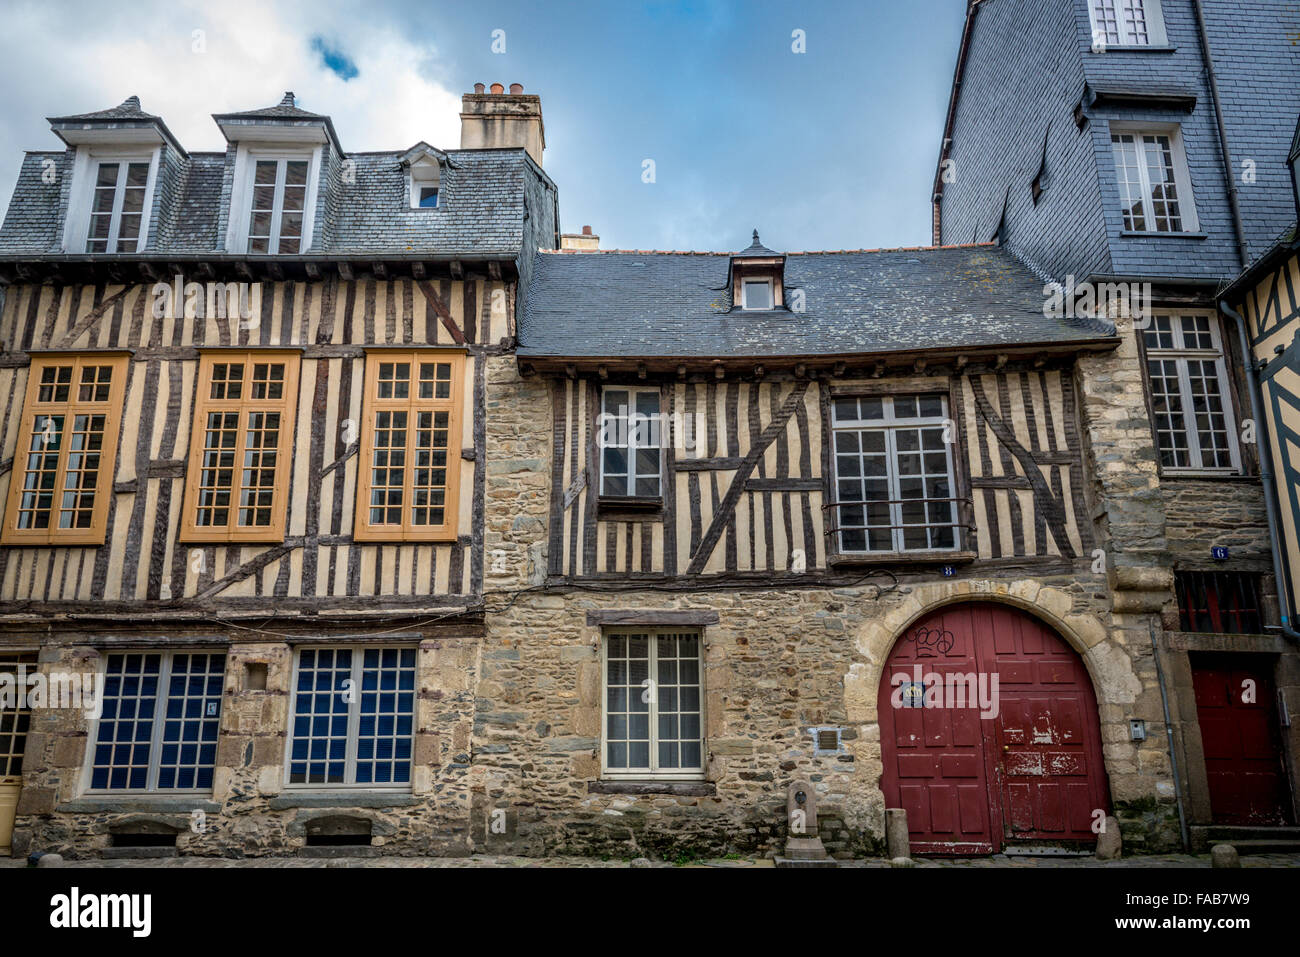 Half-Timbered and stone houses and buildings in Rennes, the capital of Brittany in Western France. Stock Photo